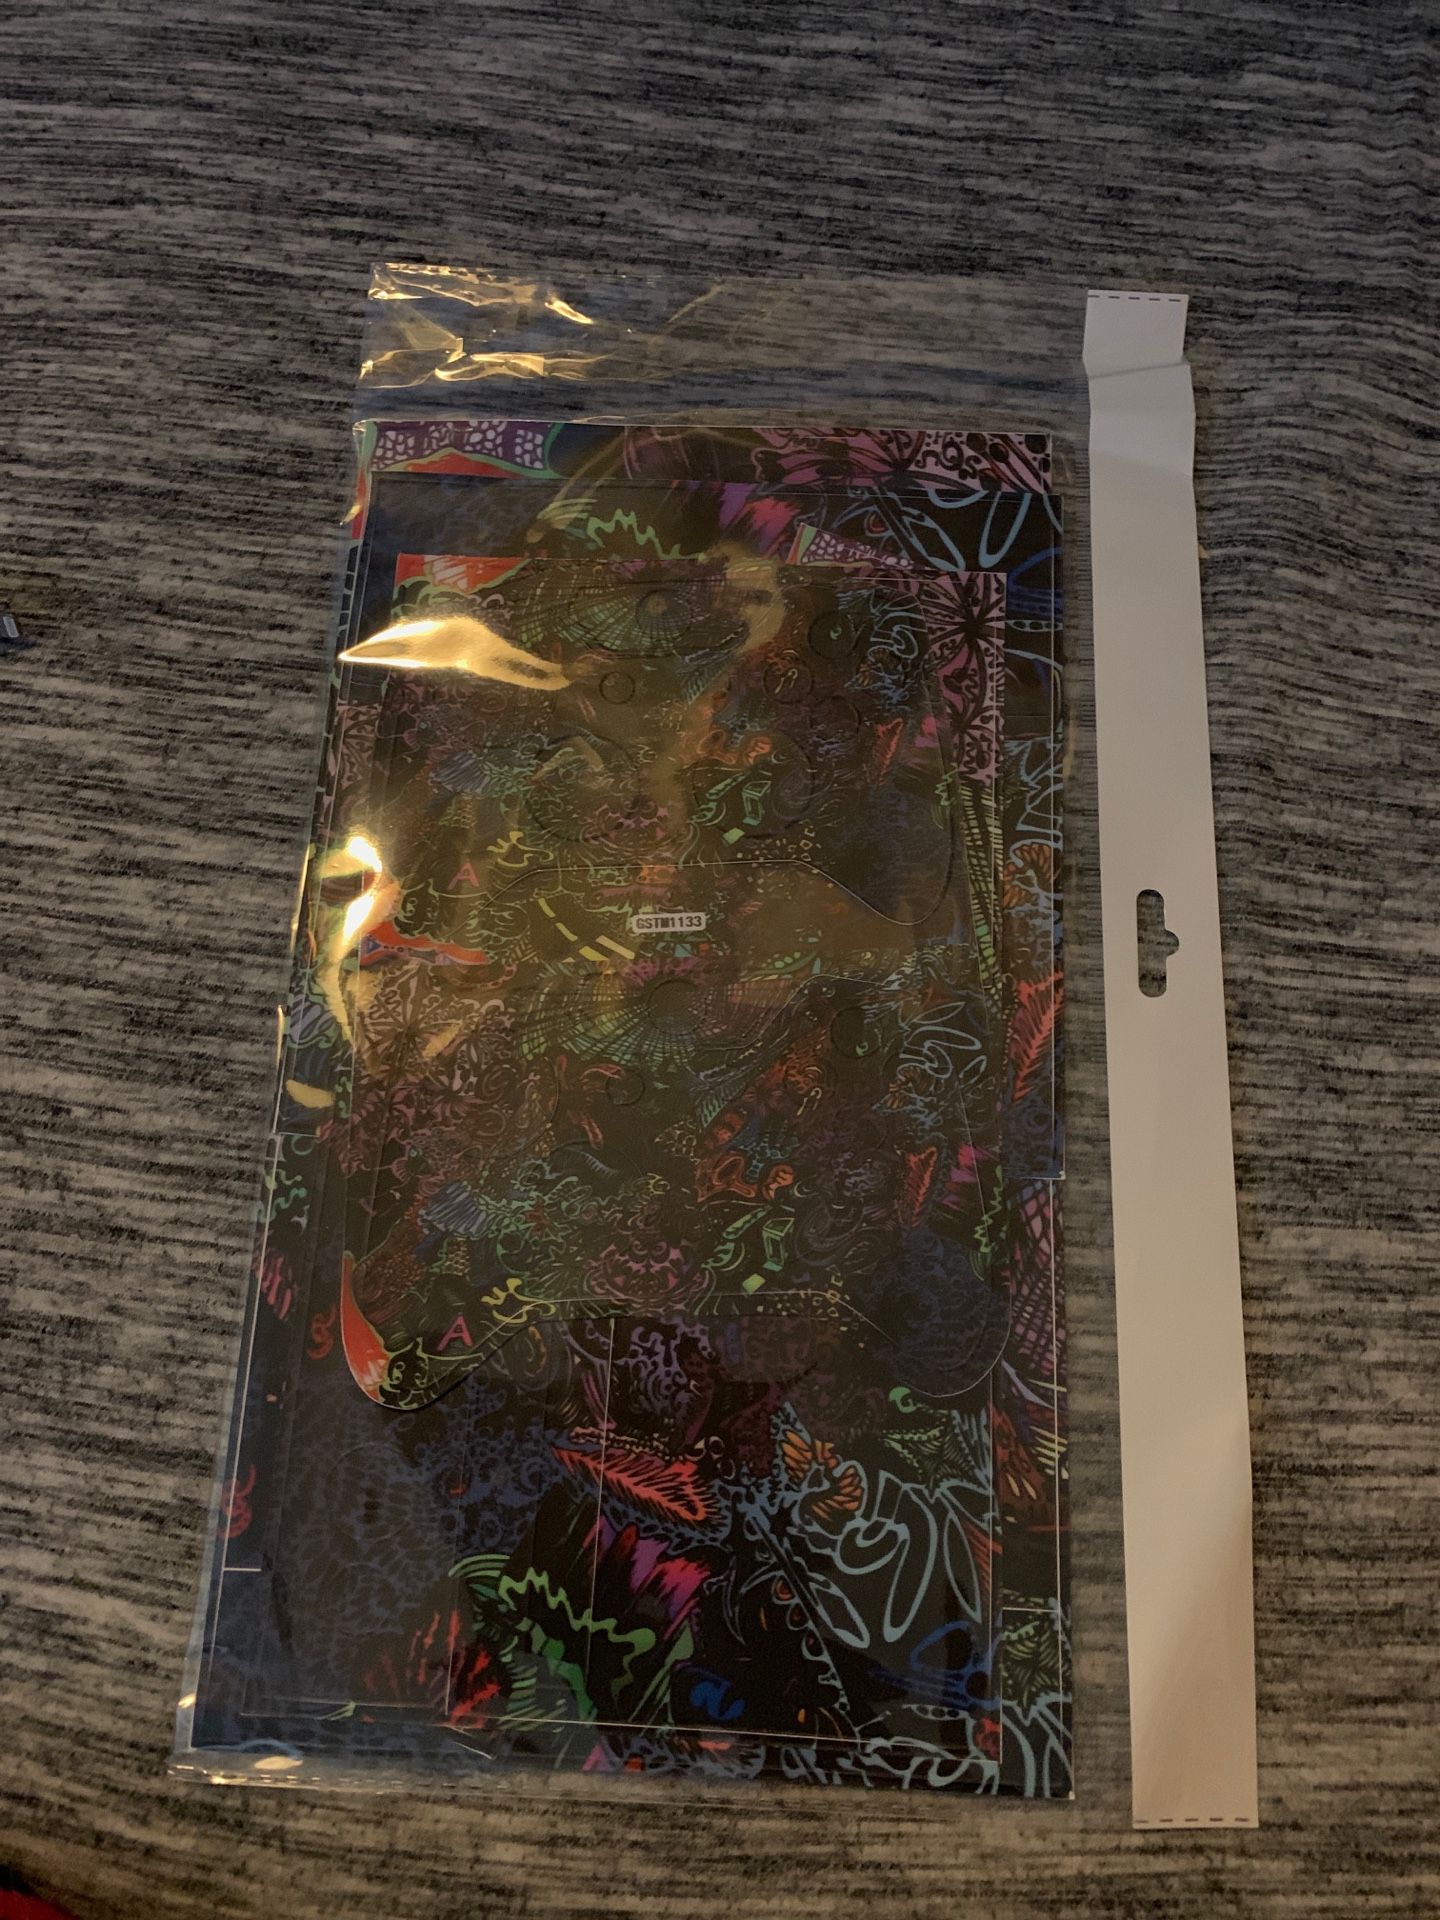 Xbox One Vinyl Skin w/ Controller skins as well